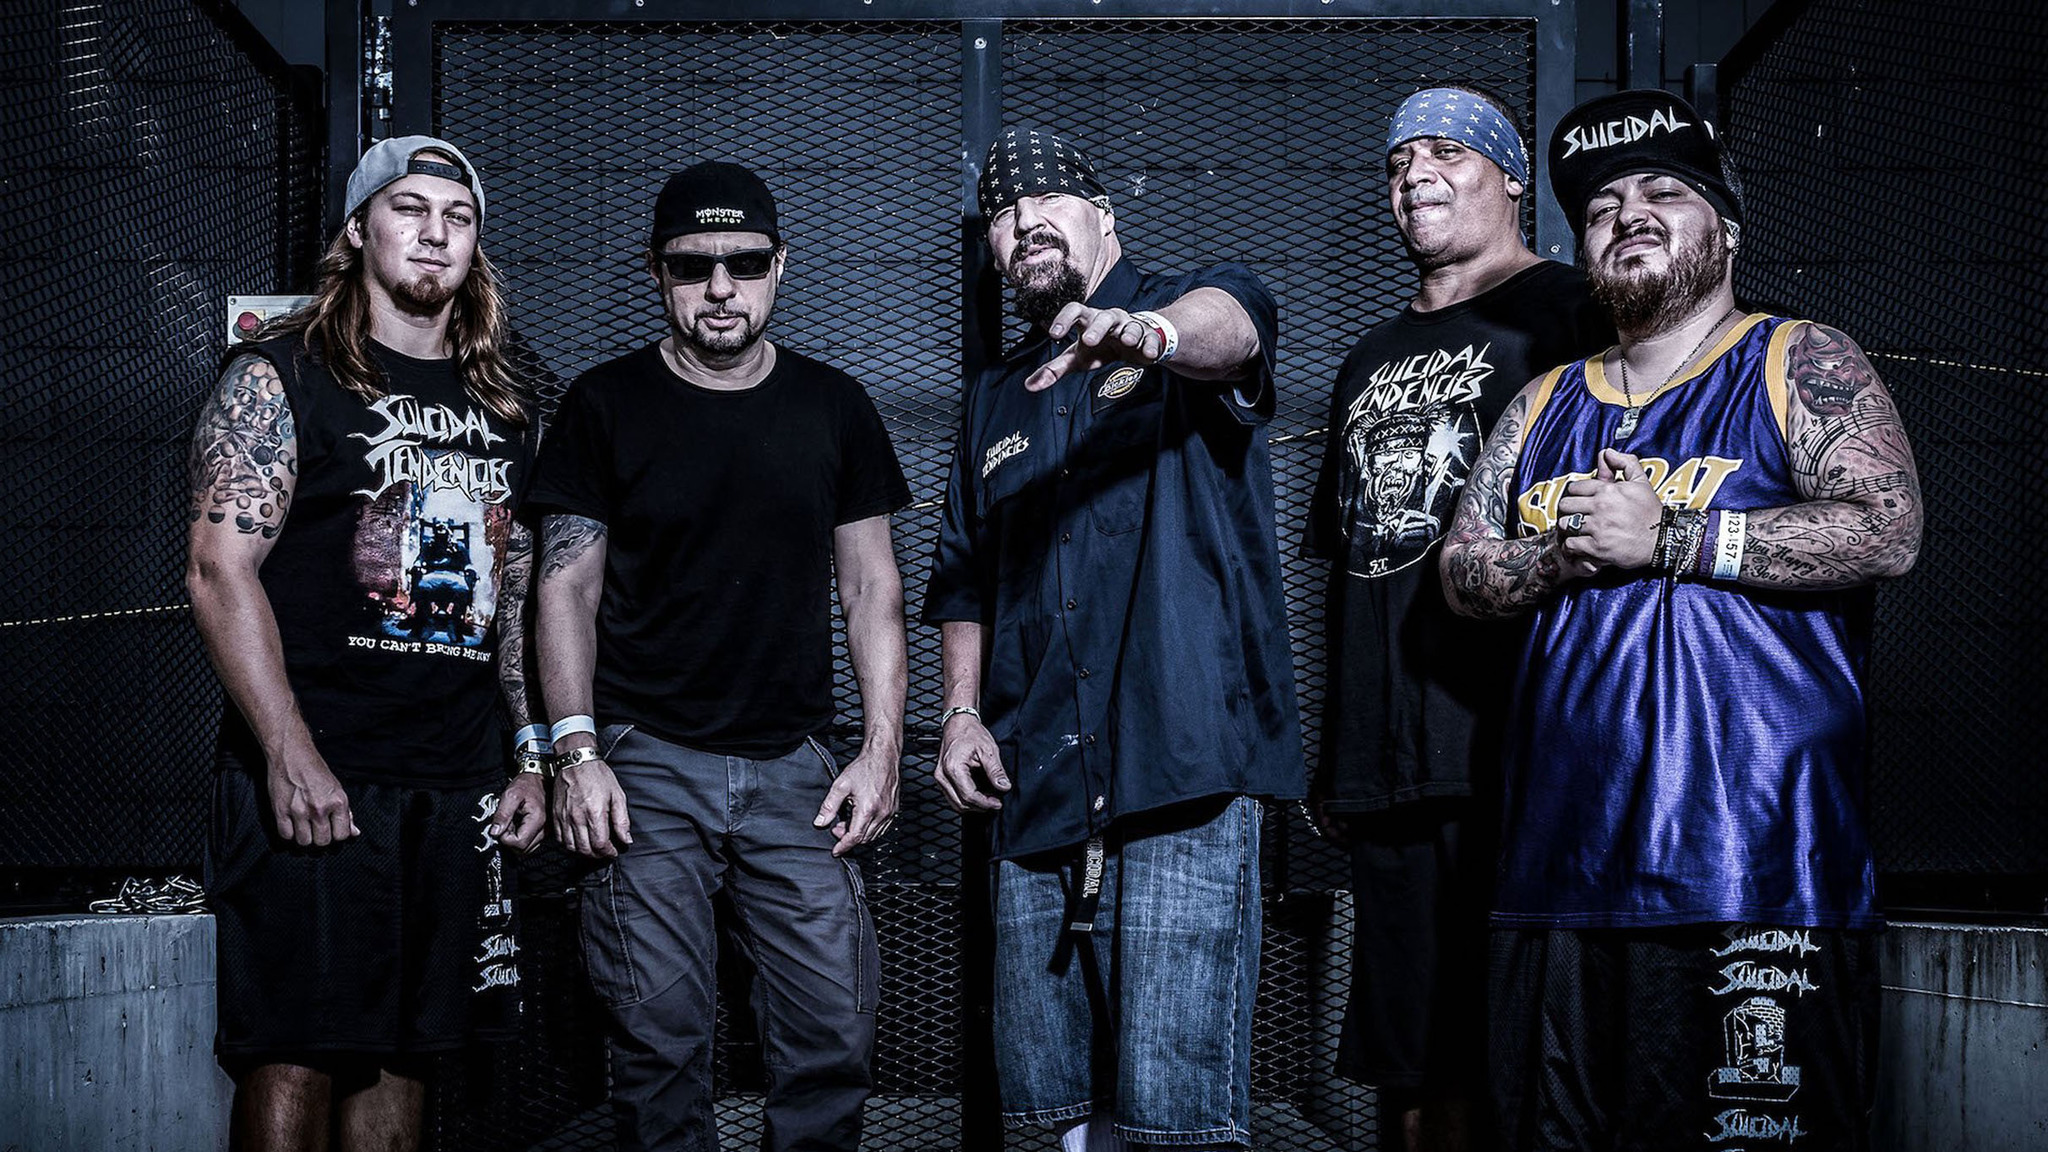 Dave Lombardo says new Suicidal Tendencies album to arrive in September